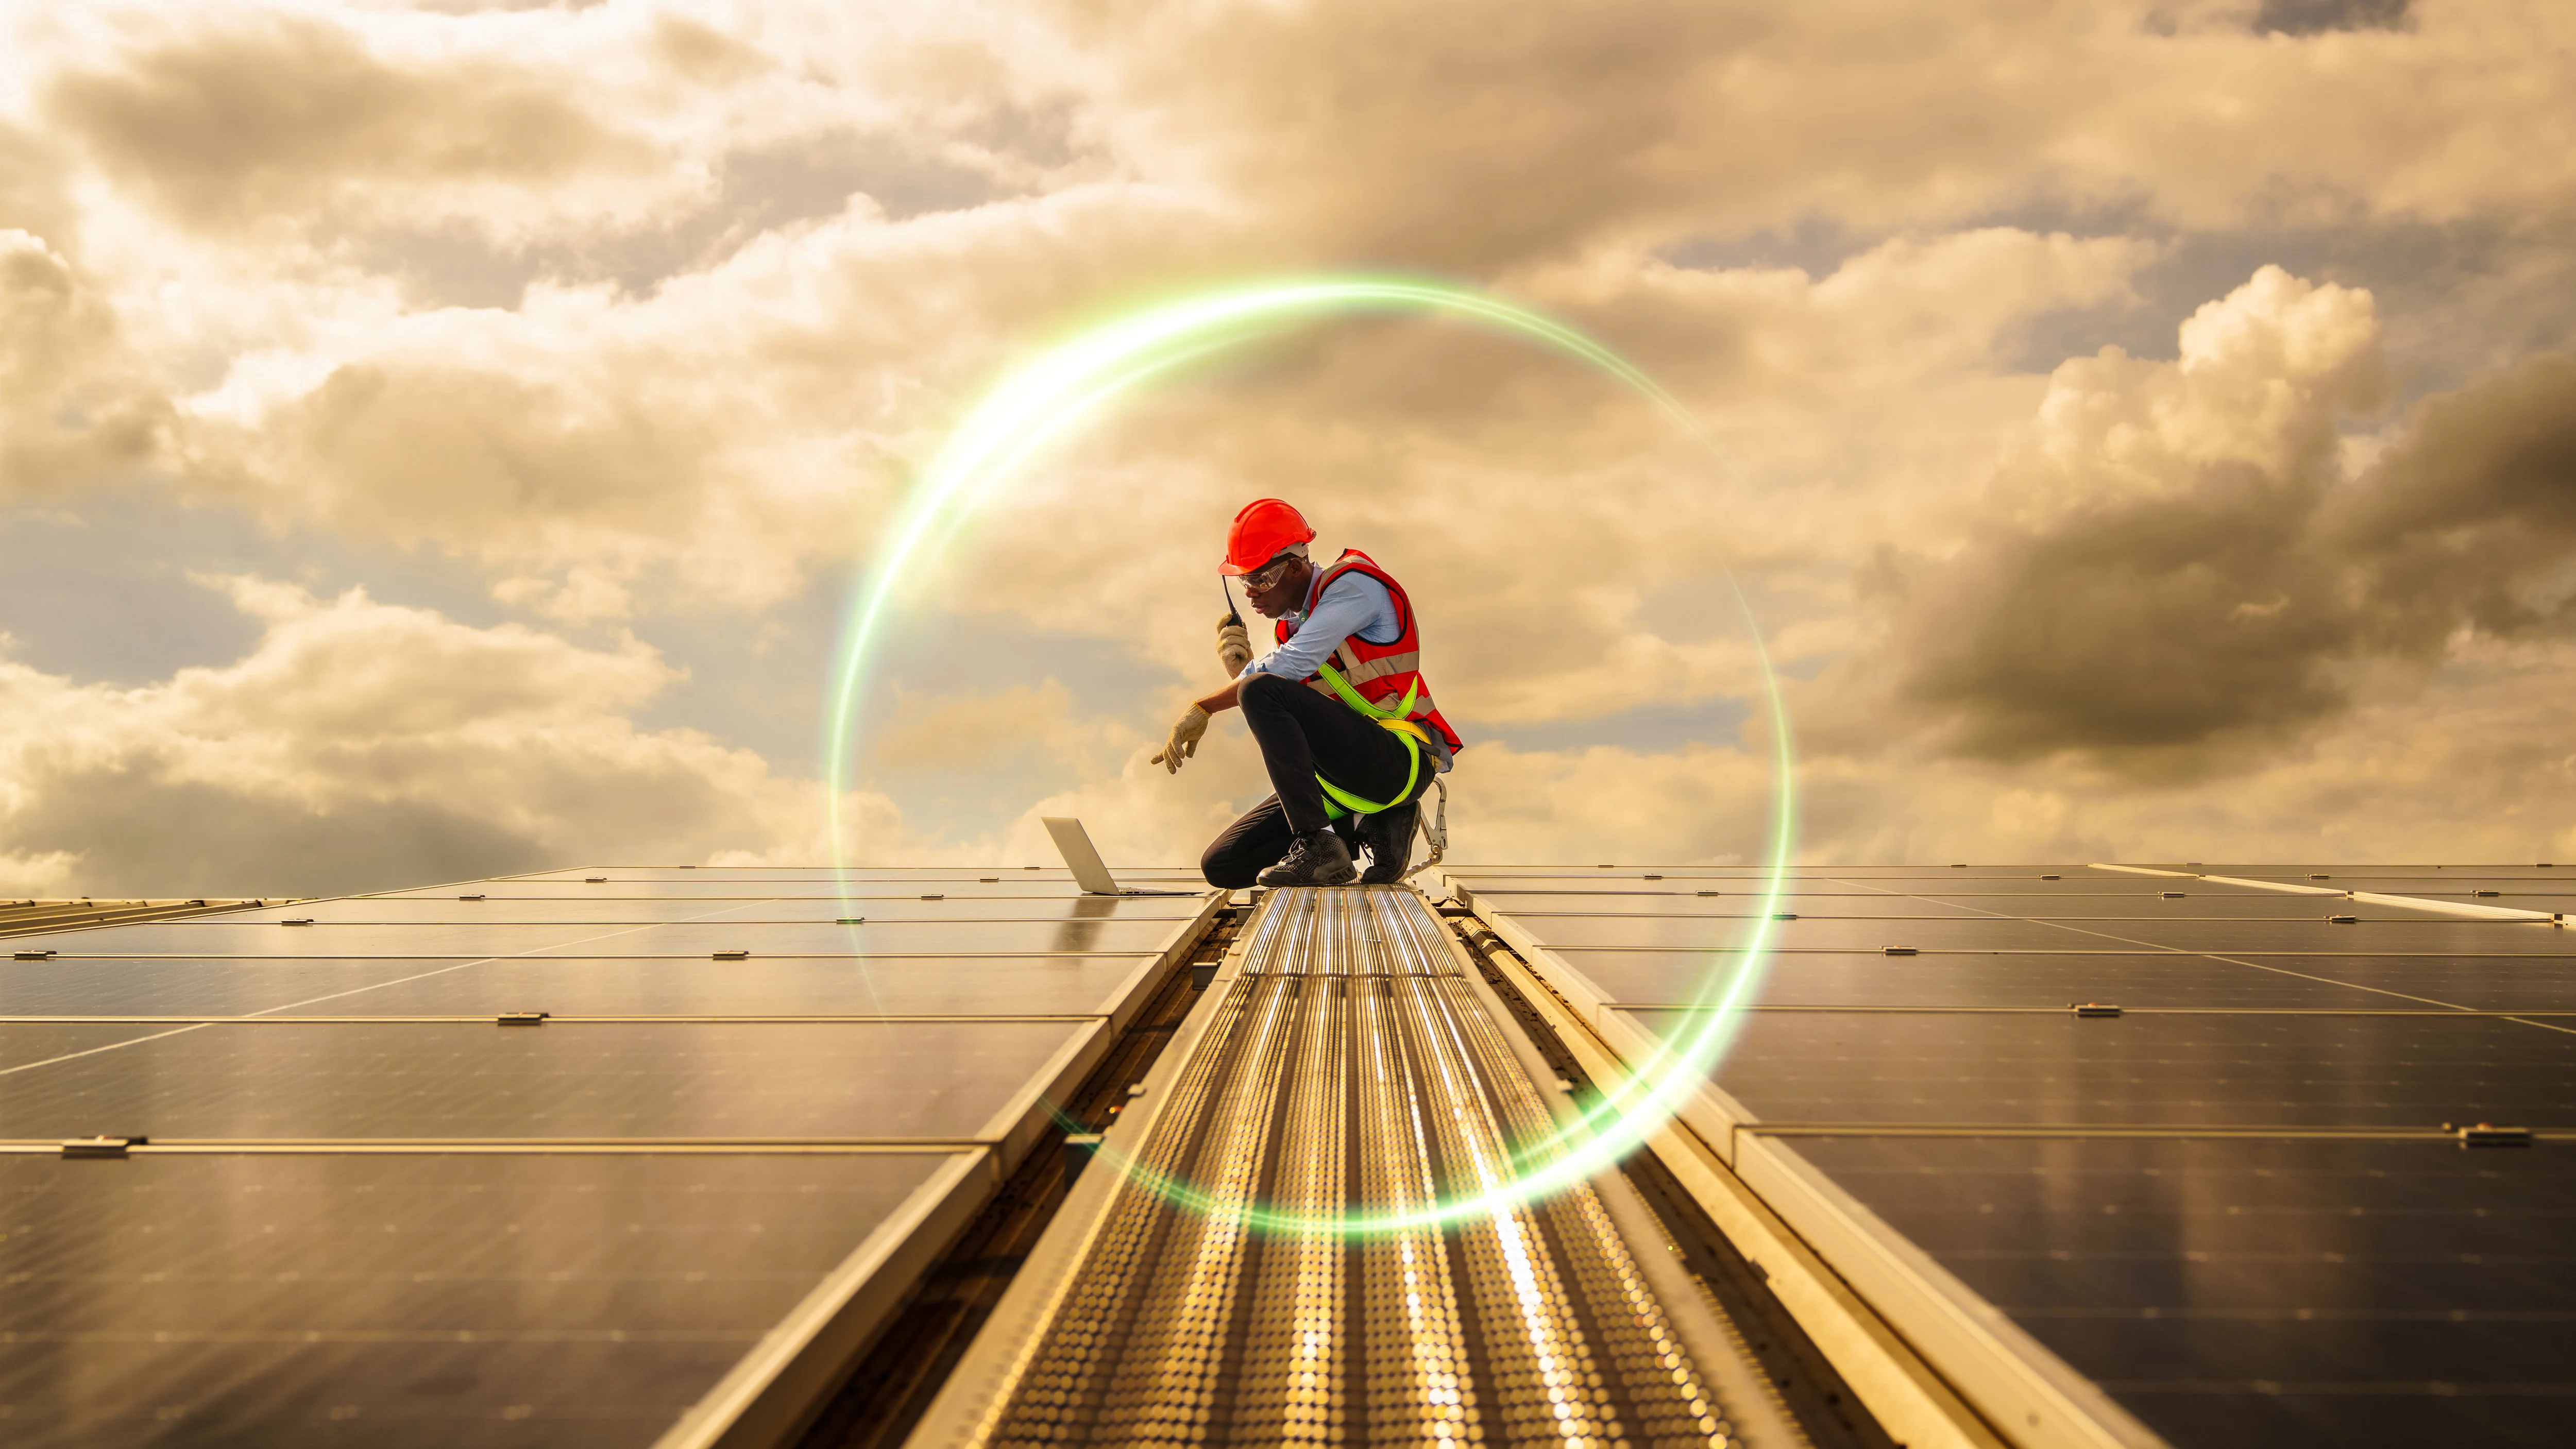 Engineer on solar panels under clouds with lens flare